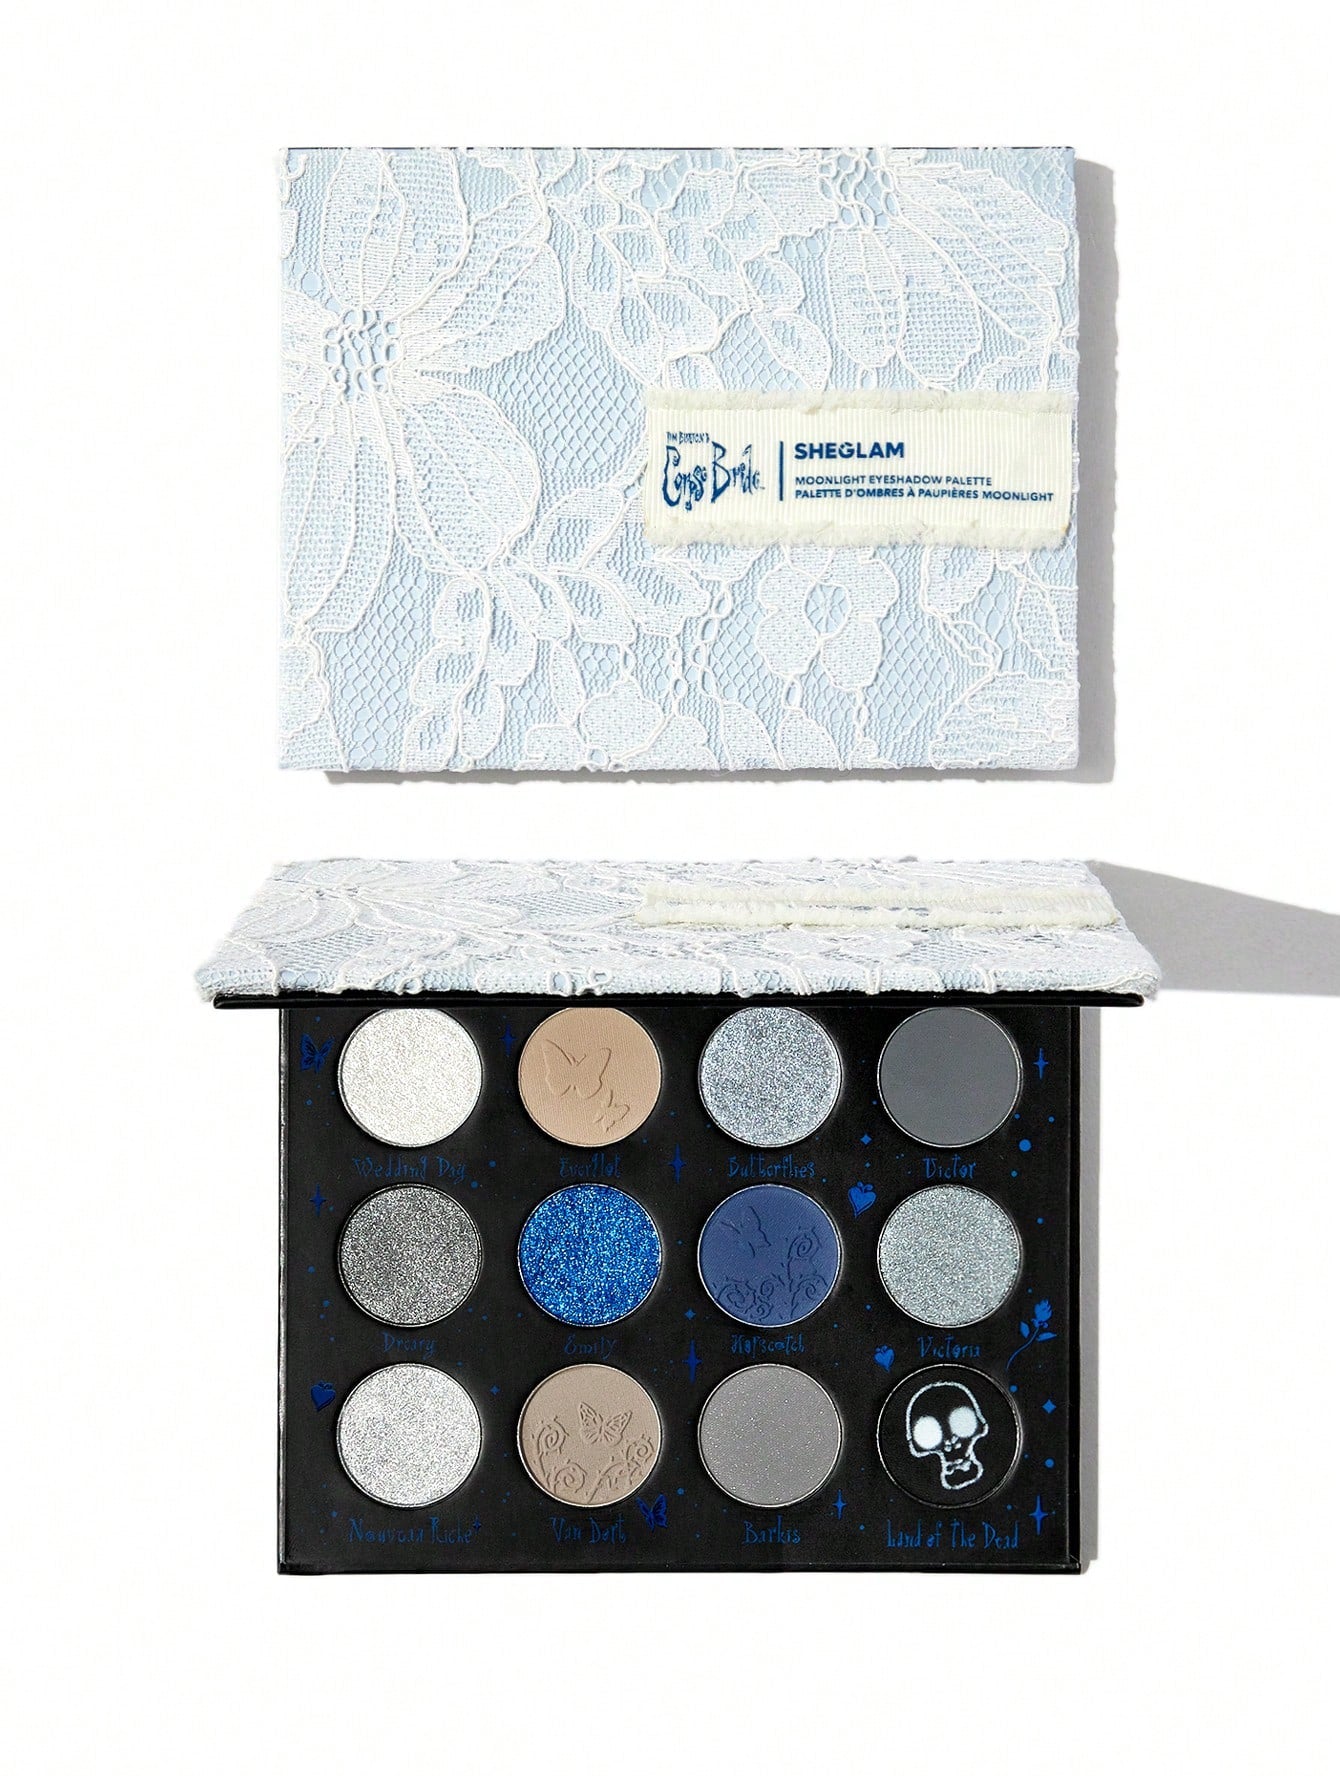 Corpse Bride Collection Moonlight Eyeshadow Palette